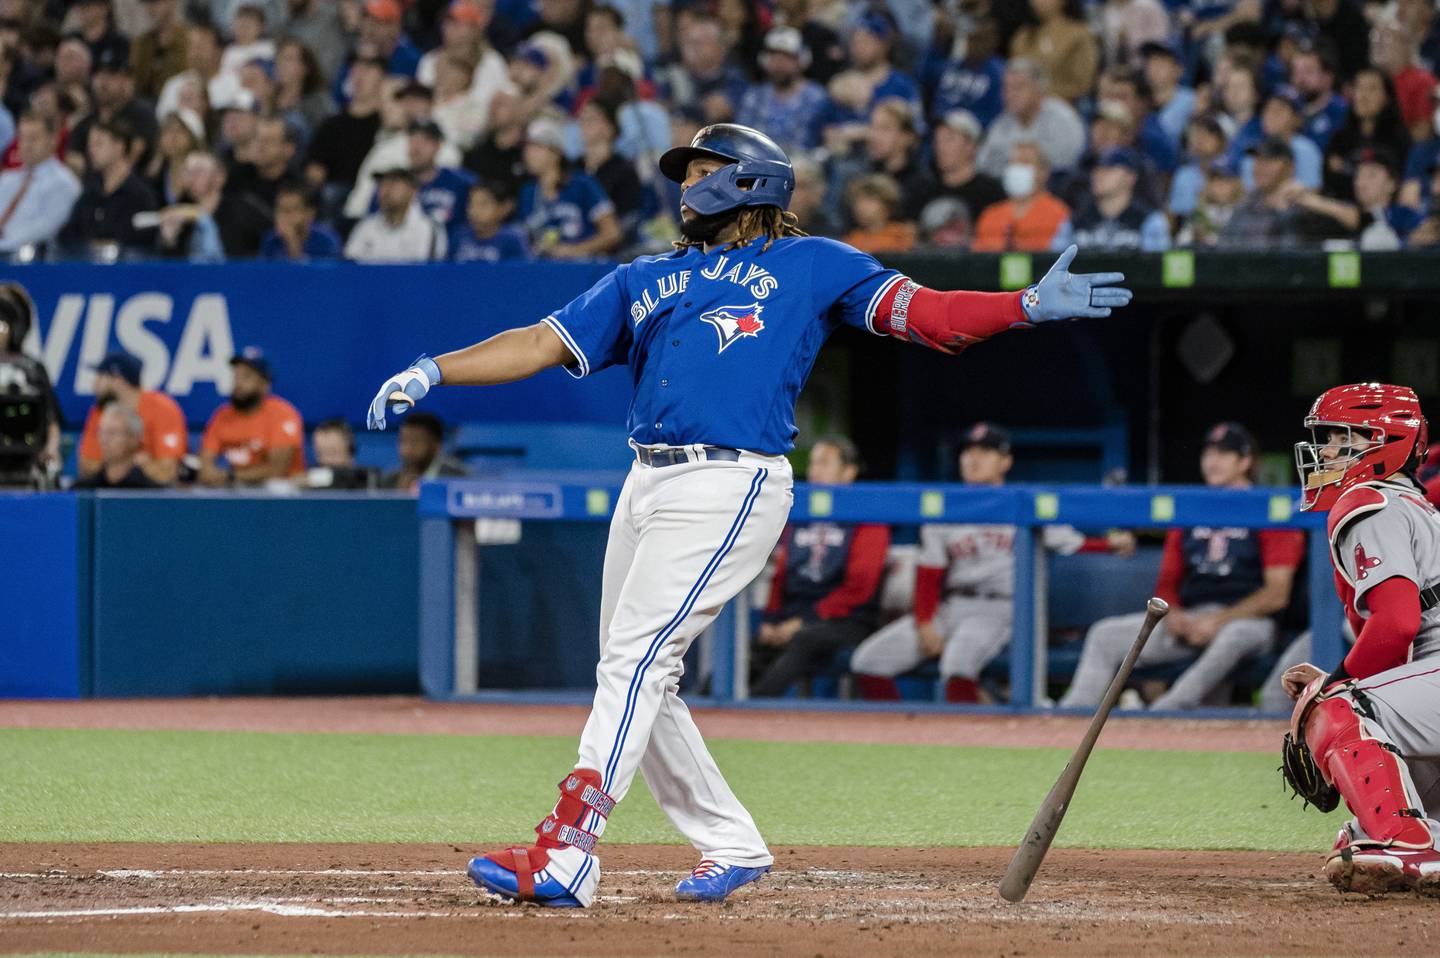 Blue Jays slugger Vladimir Guerrero Jr. watches his two-run home run against the Red Sox during the third inning Friday in Toronto.